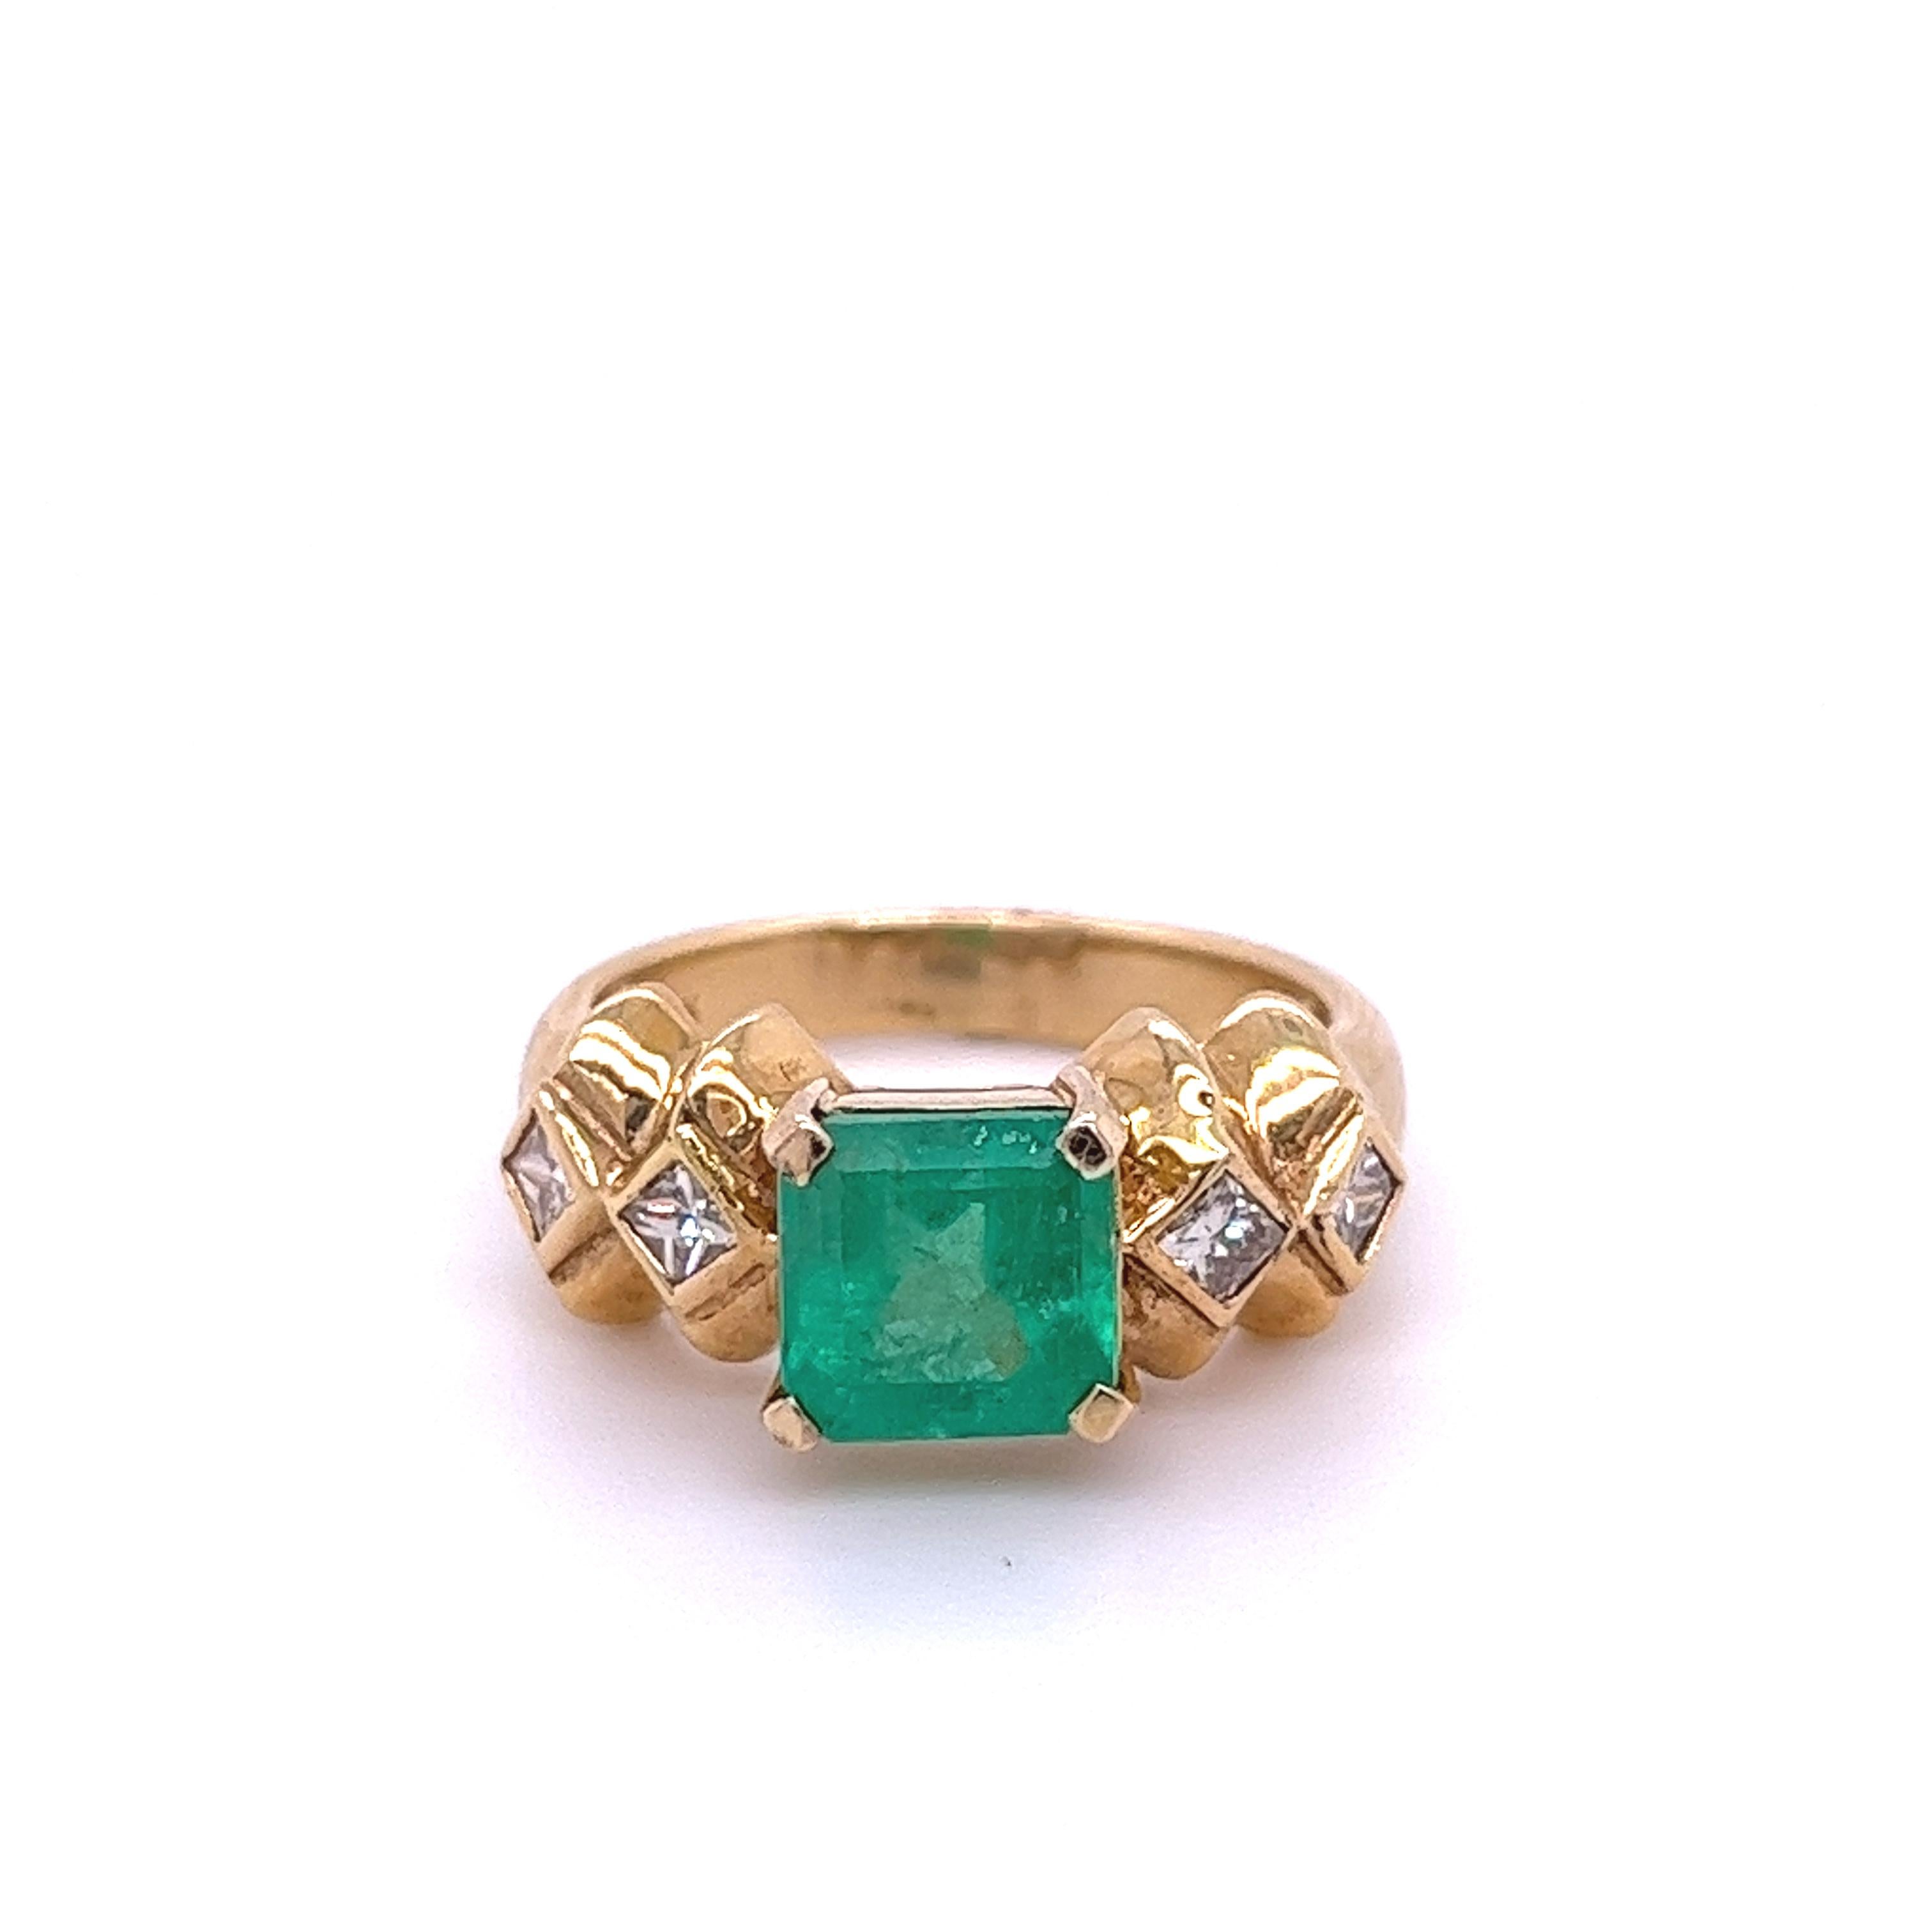 Emerald-cut Colombian Emerald mounted in 14k solid yellow gold ring set with princess-cut diamond accents. A superb quality Emerald with a vivid, bright green, color hue. This Emerald bears excellent luster, vibrance, and brilliance. 

14k solid